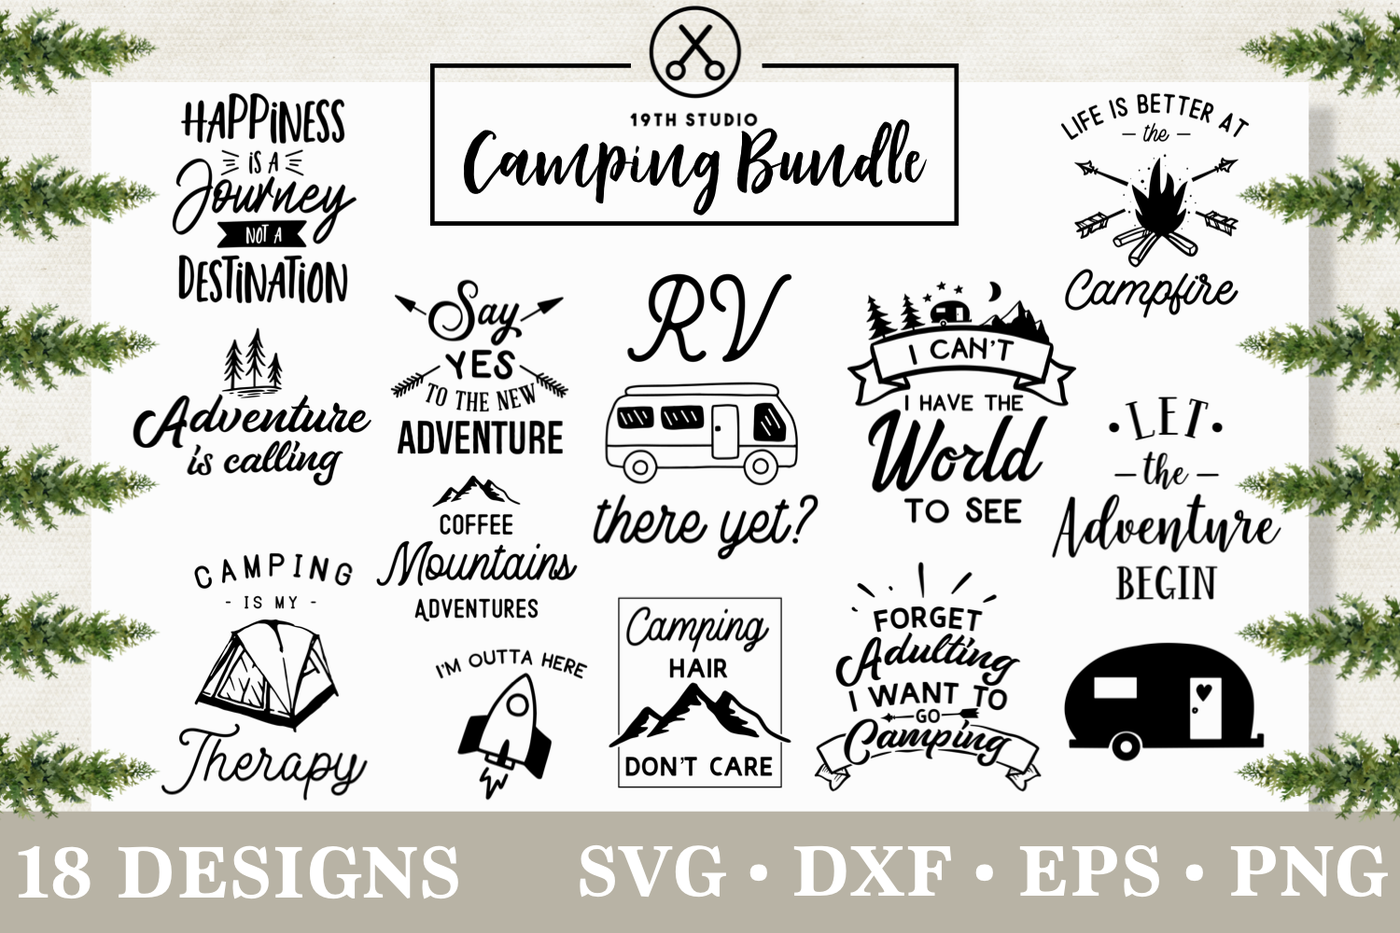 ori 3475893 7458d2b37246b365dd35fc6854a84b8c802d3481 camping svg bundle svg dxf eps png m3